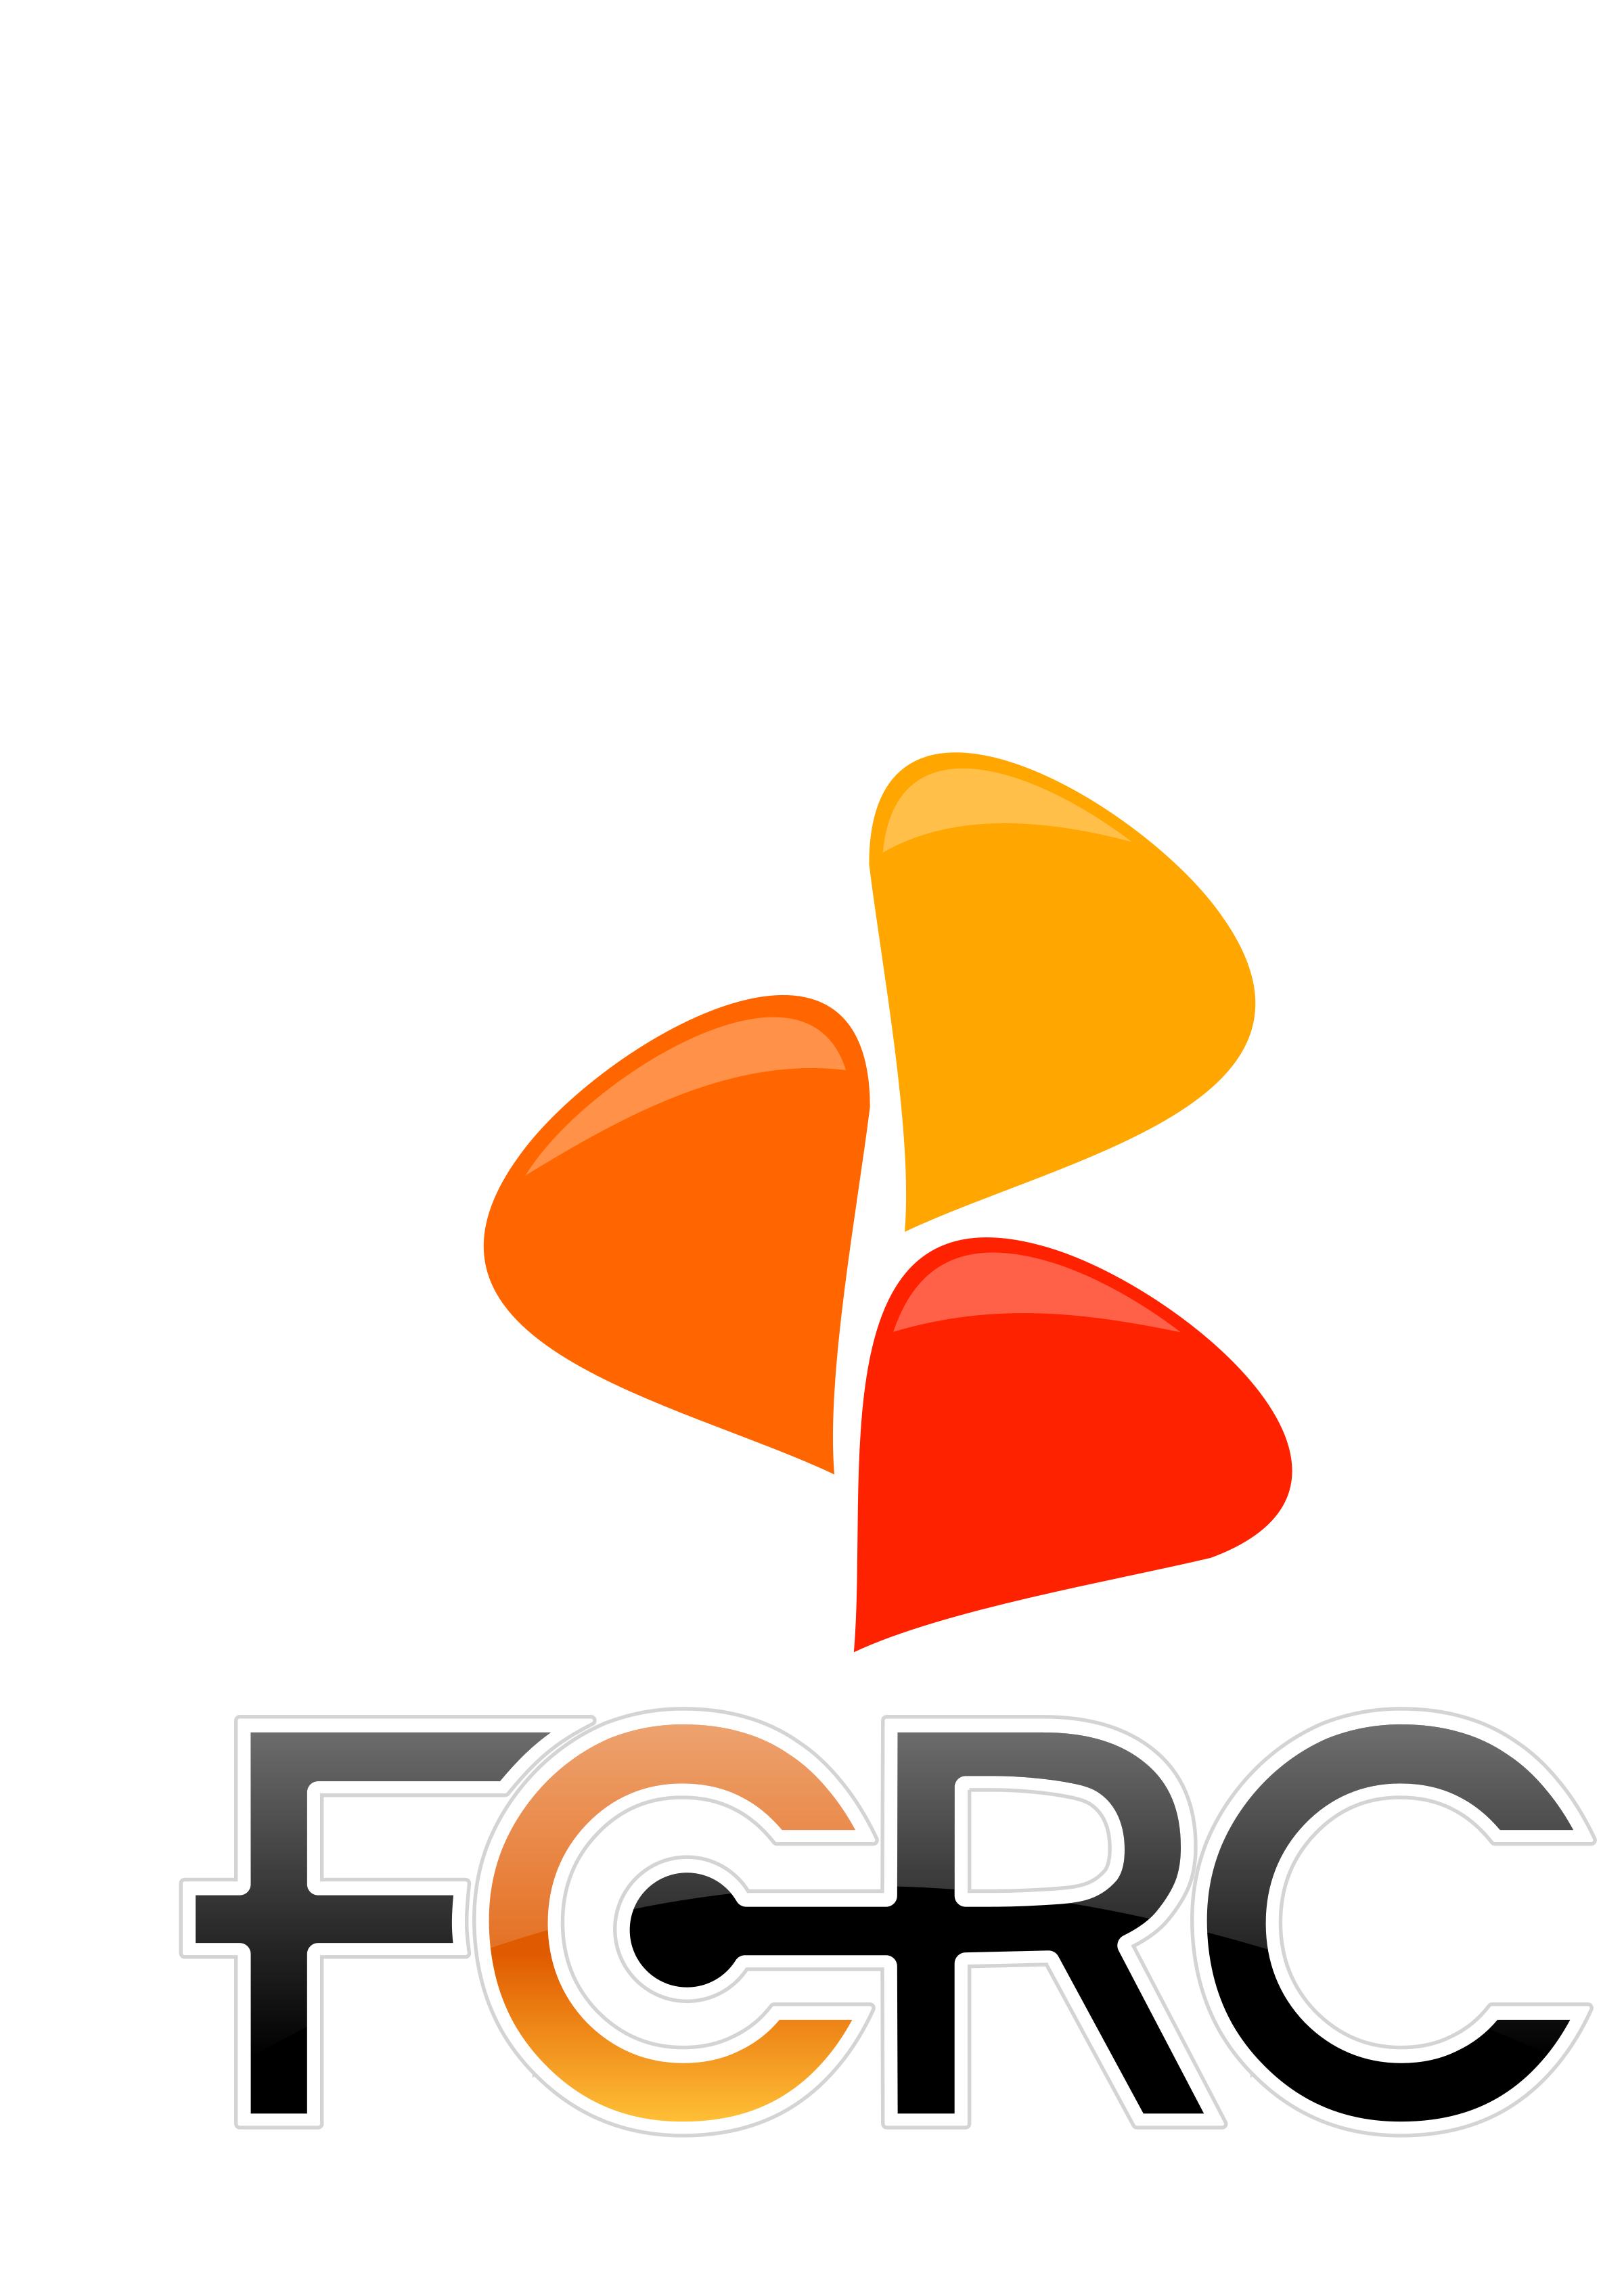 FCRC speech bubble logo and text png